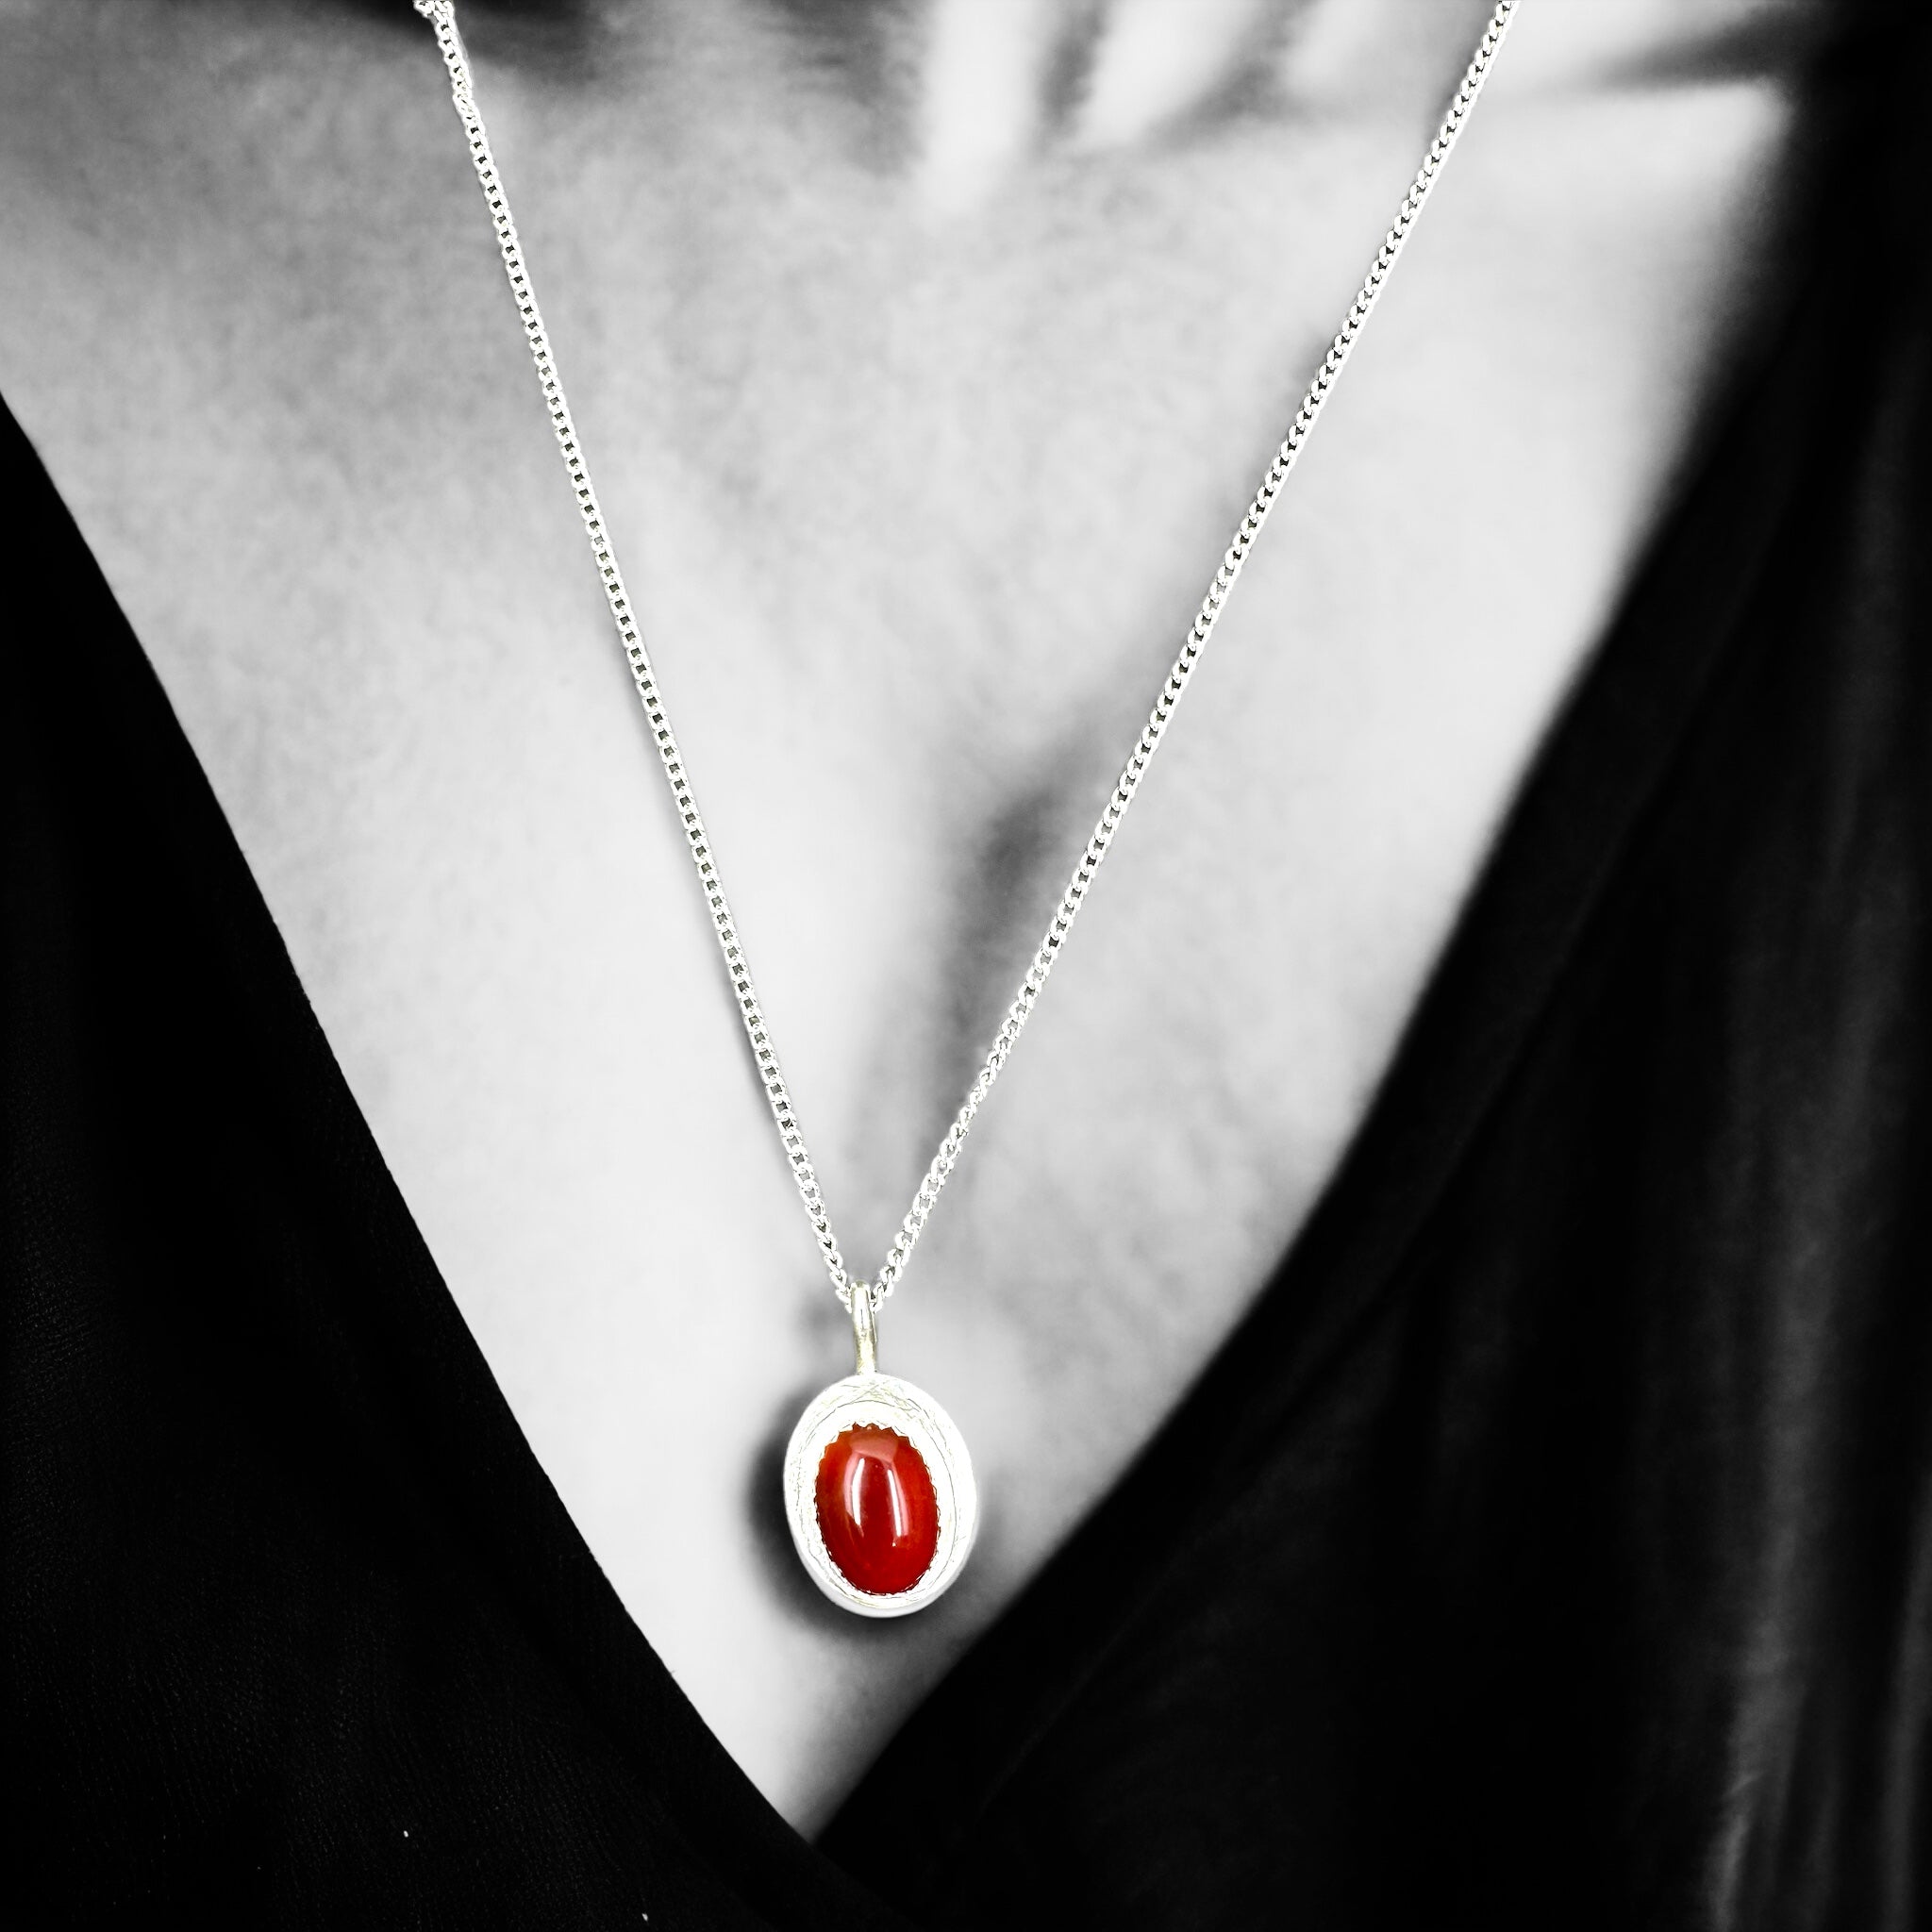 Introducing our Argentium Silver Carnelian Pendant: Unparalleled 